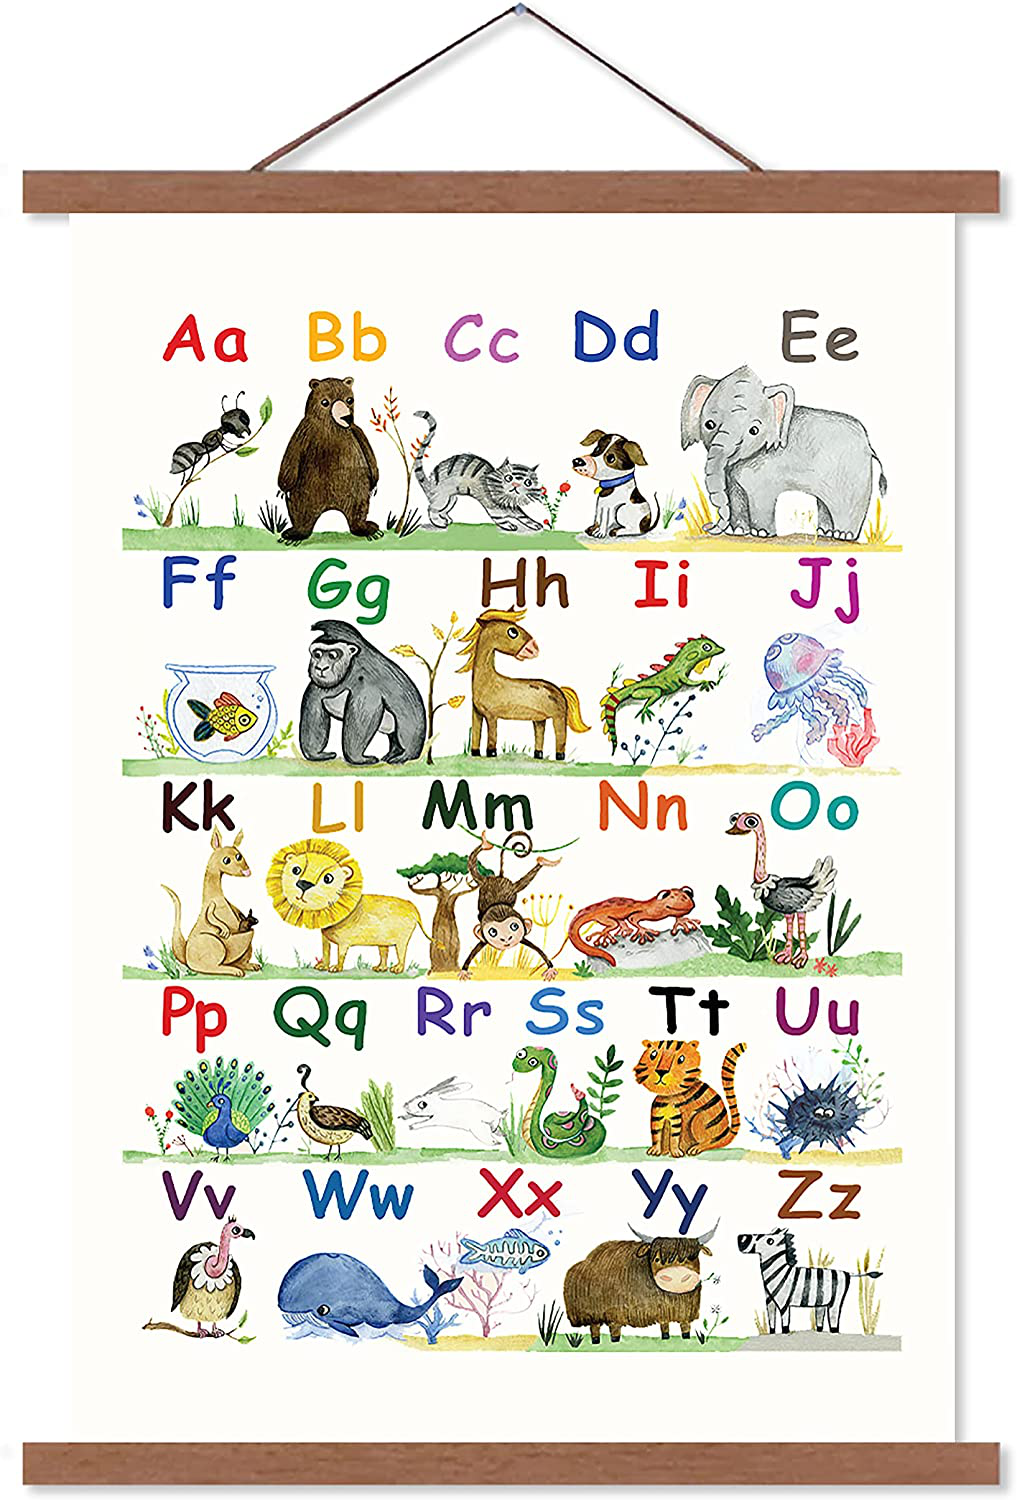 Alphabet Poster for Classroom Decor | ABC Poster for Toddlers Wall Playroom & Nursery Decor | Canvas Wall Art - 15x21 | Kids Alphabet Chart Wall Hanging for Boys & Girls Room Decor